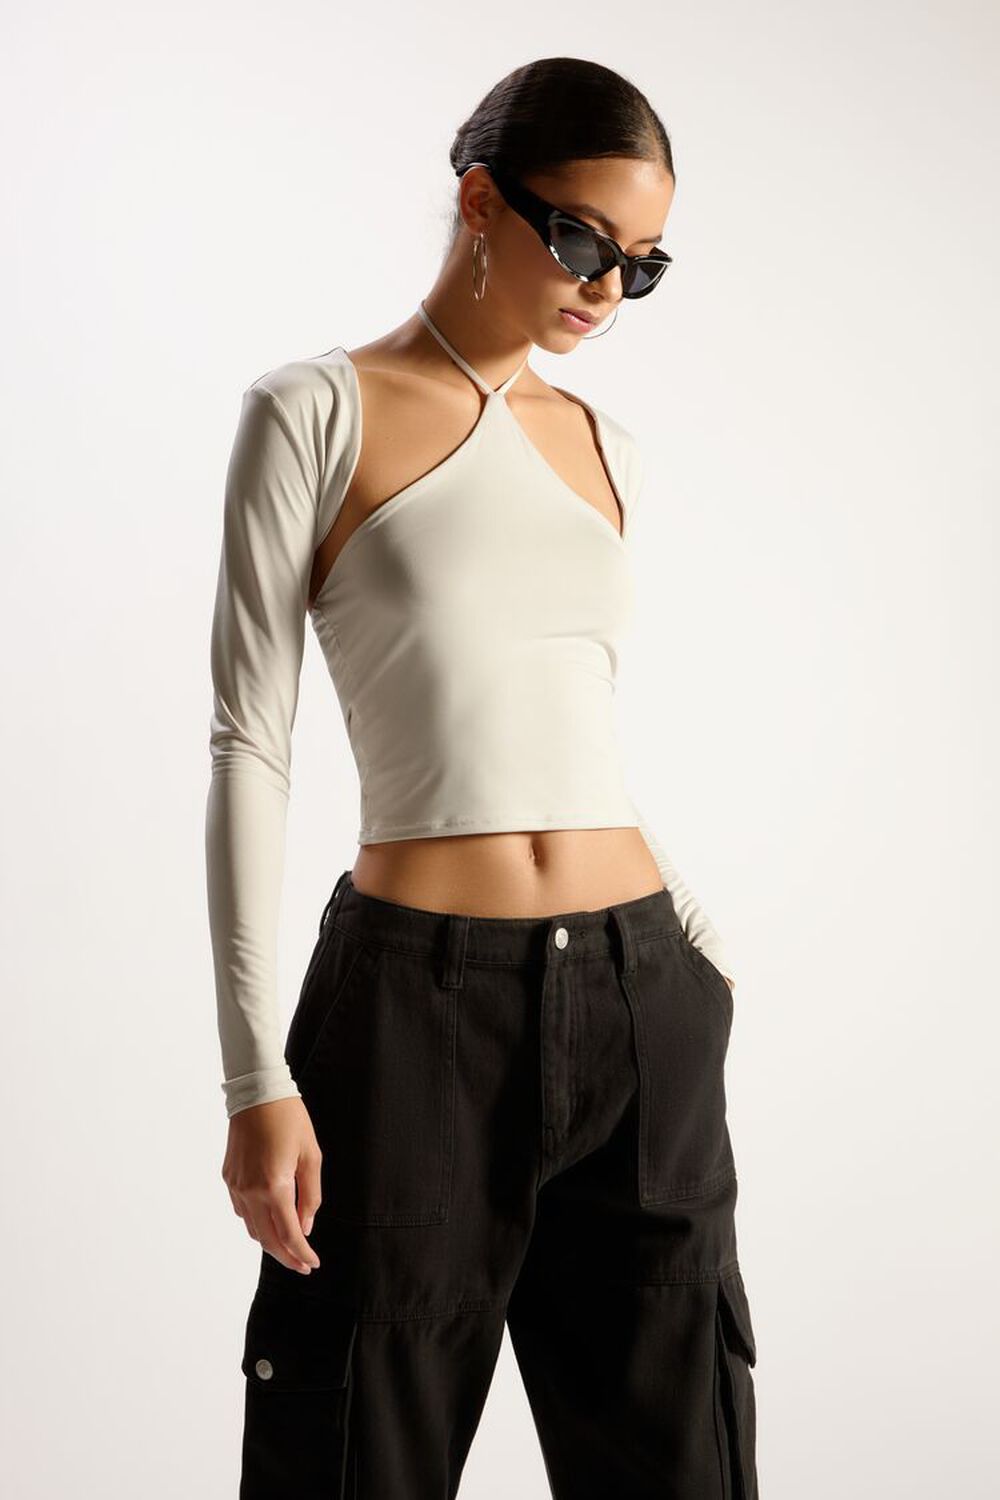 OYSTER GREY Cutout Tie-Neck Top, image 1